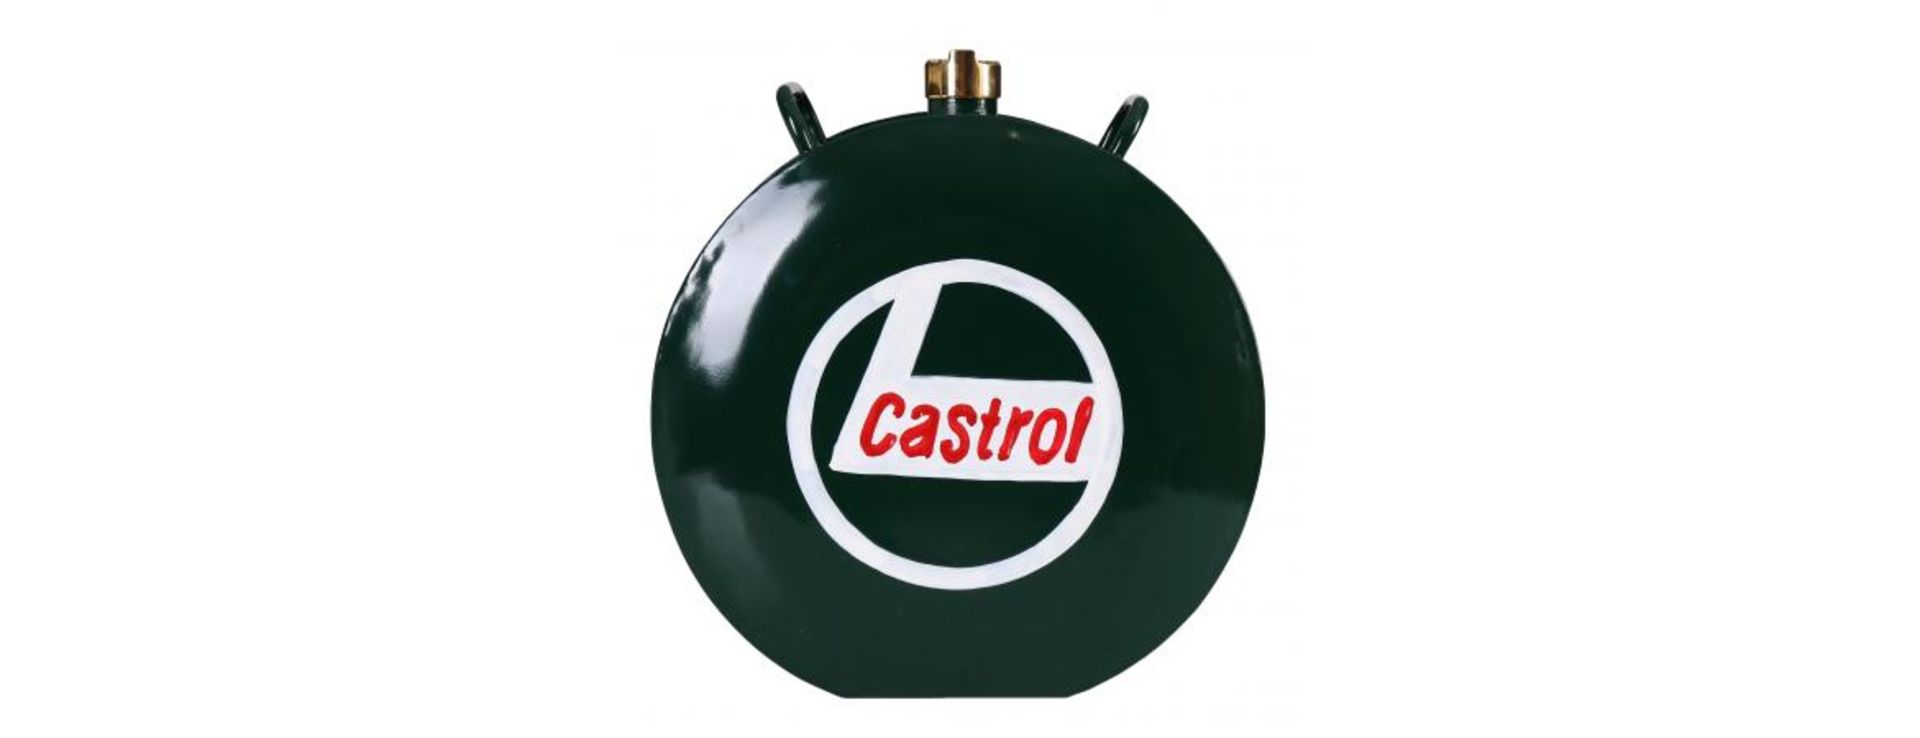 Castrol Round Oil Can - Image 3 of 4